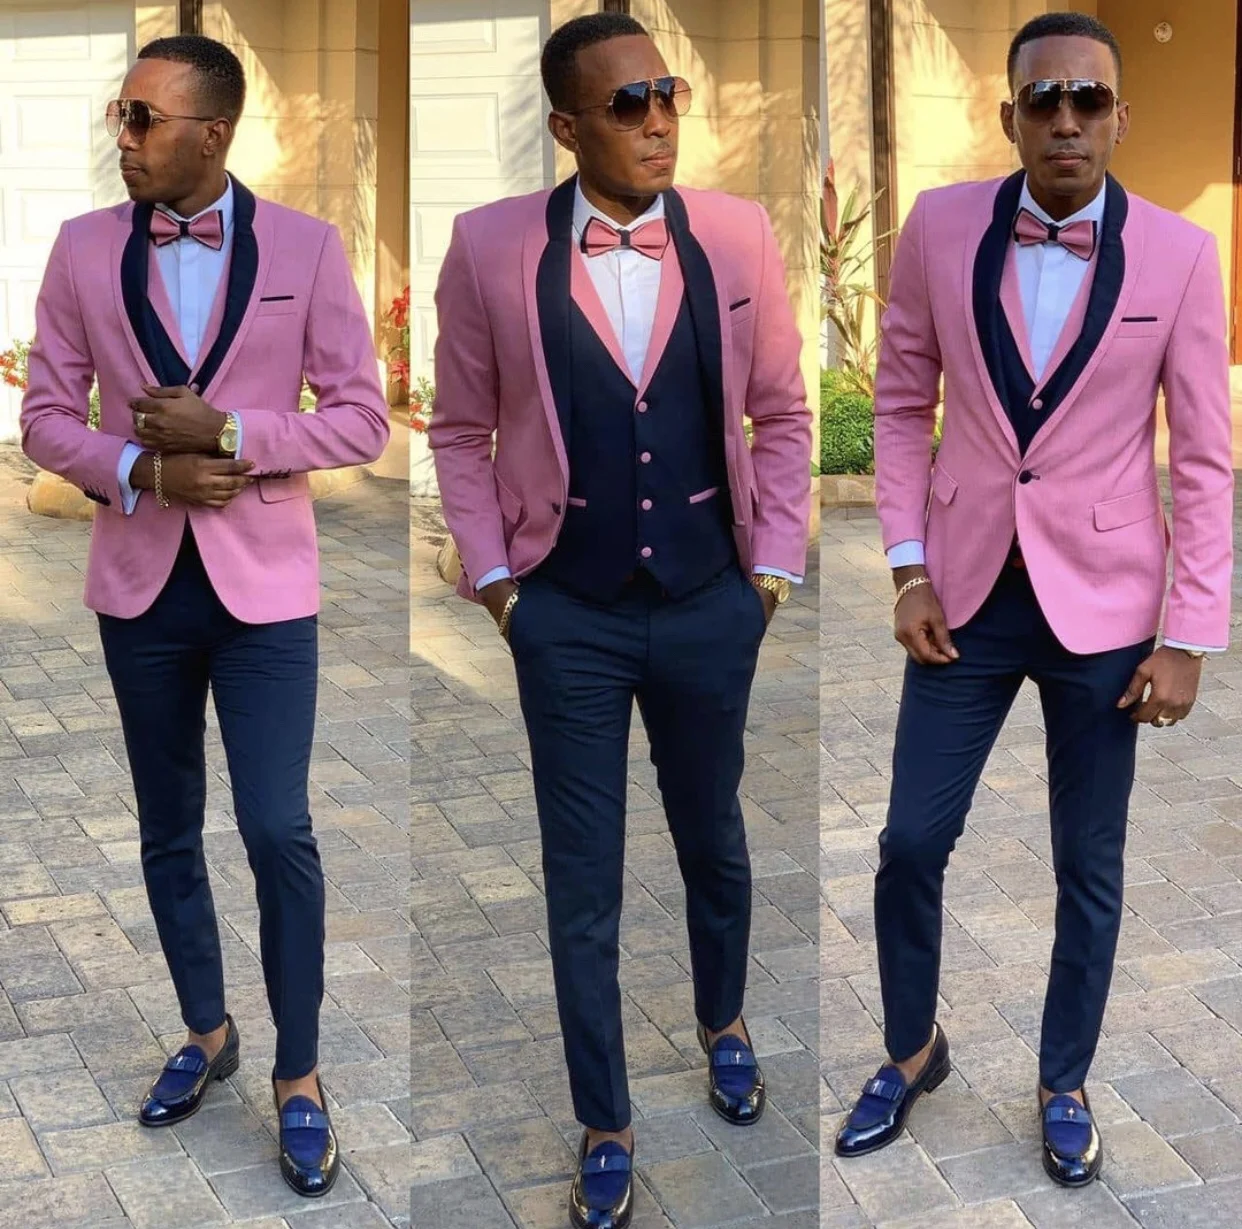 New Pink Slim Fit Men Suits Special Lapel Wedding Costume Homme Groom Suits Tuxedos Terno Masculino Party Prom Blazer 3 Pcs